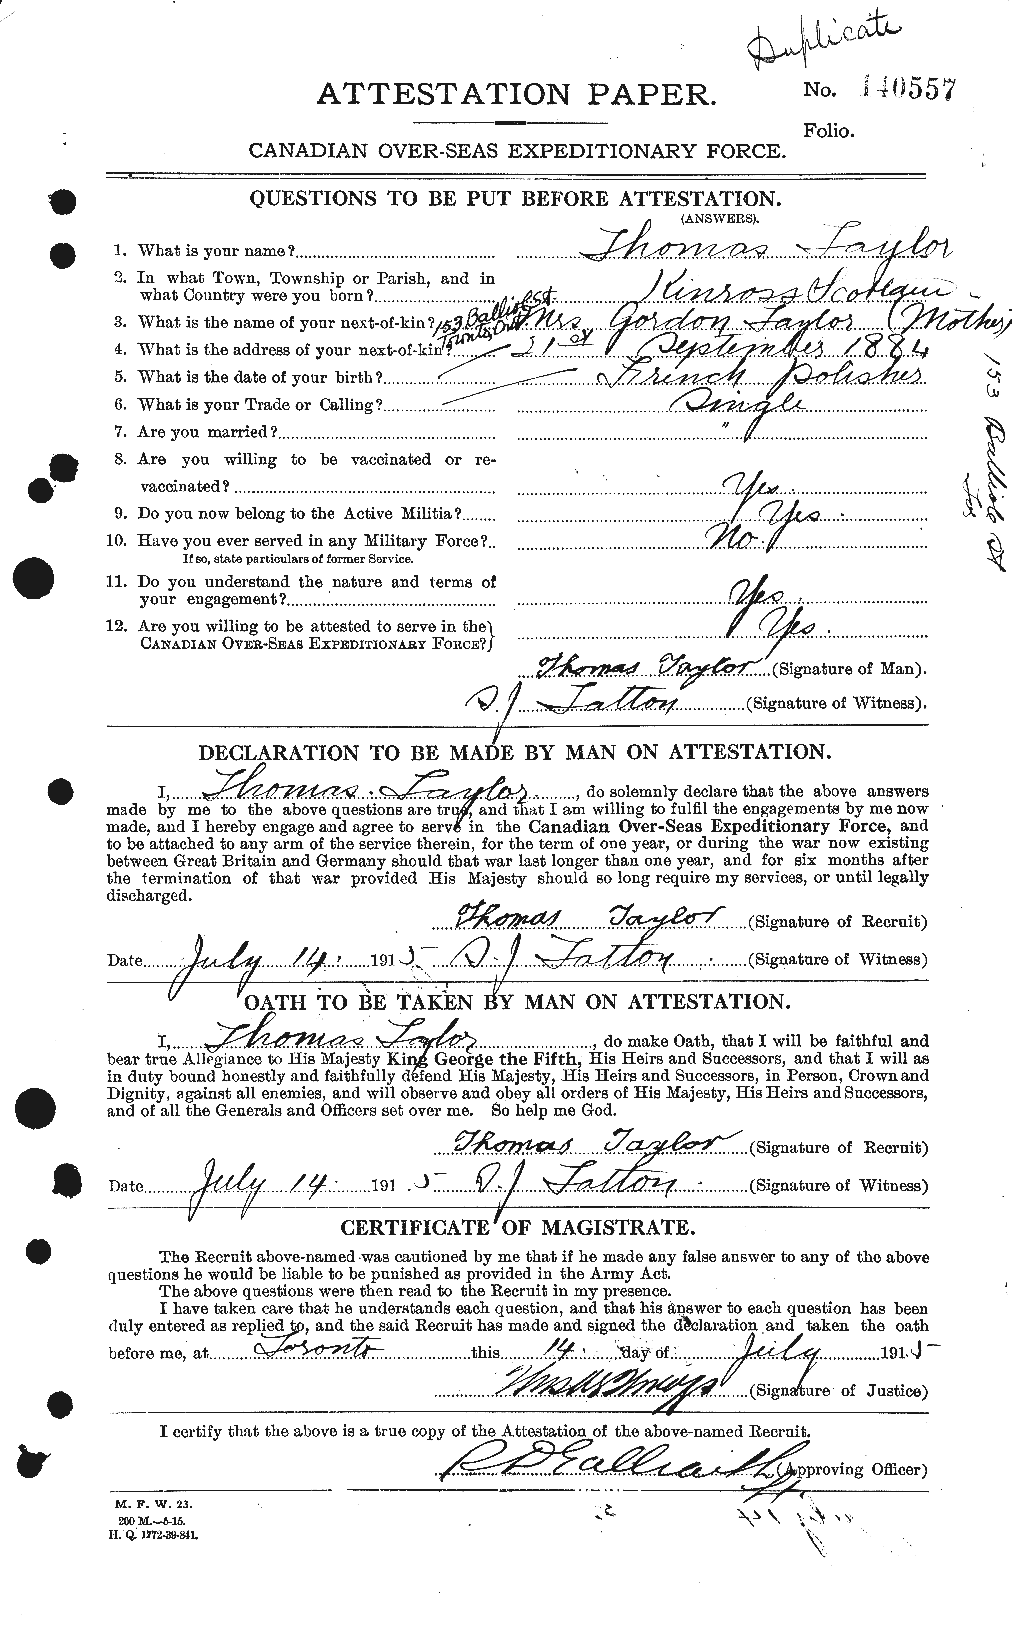 Personnel Records of the First World War - CEF 627958a